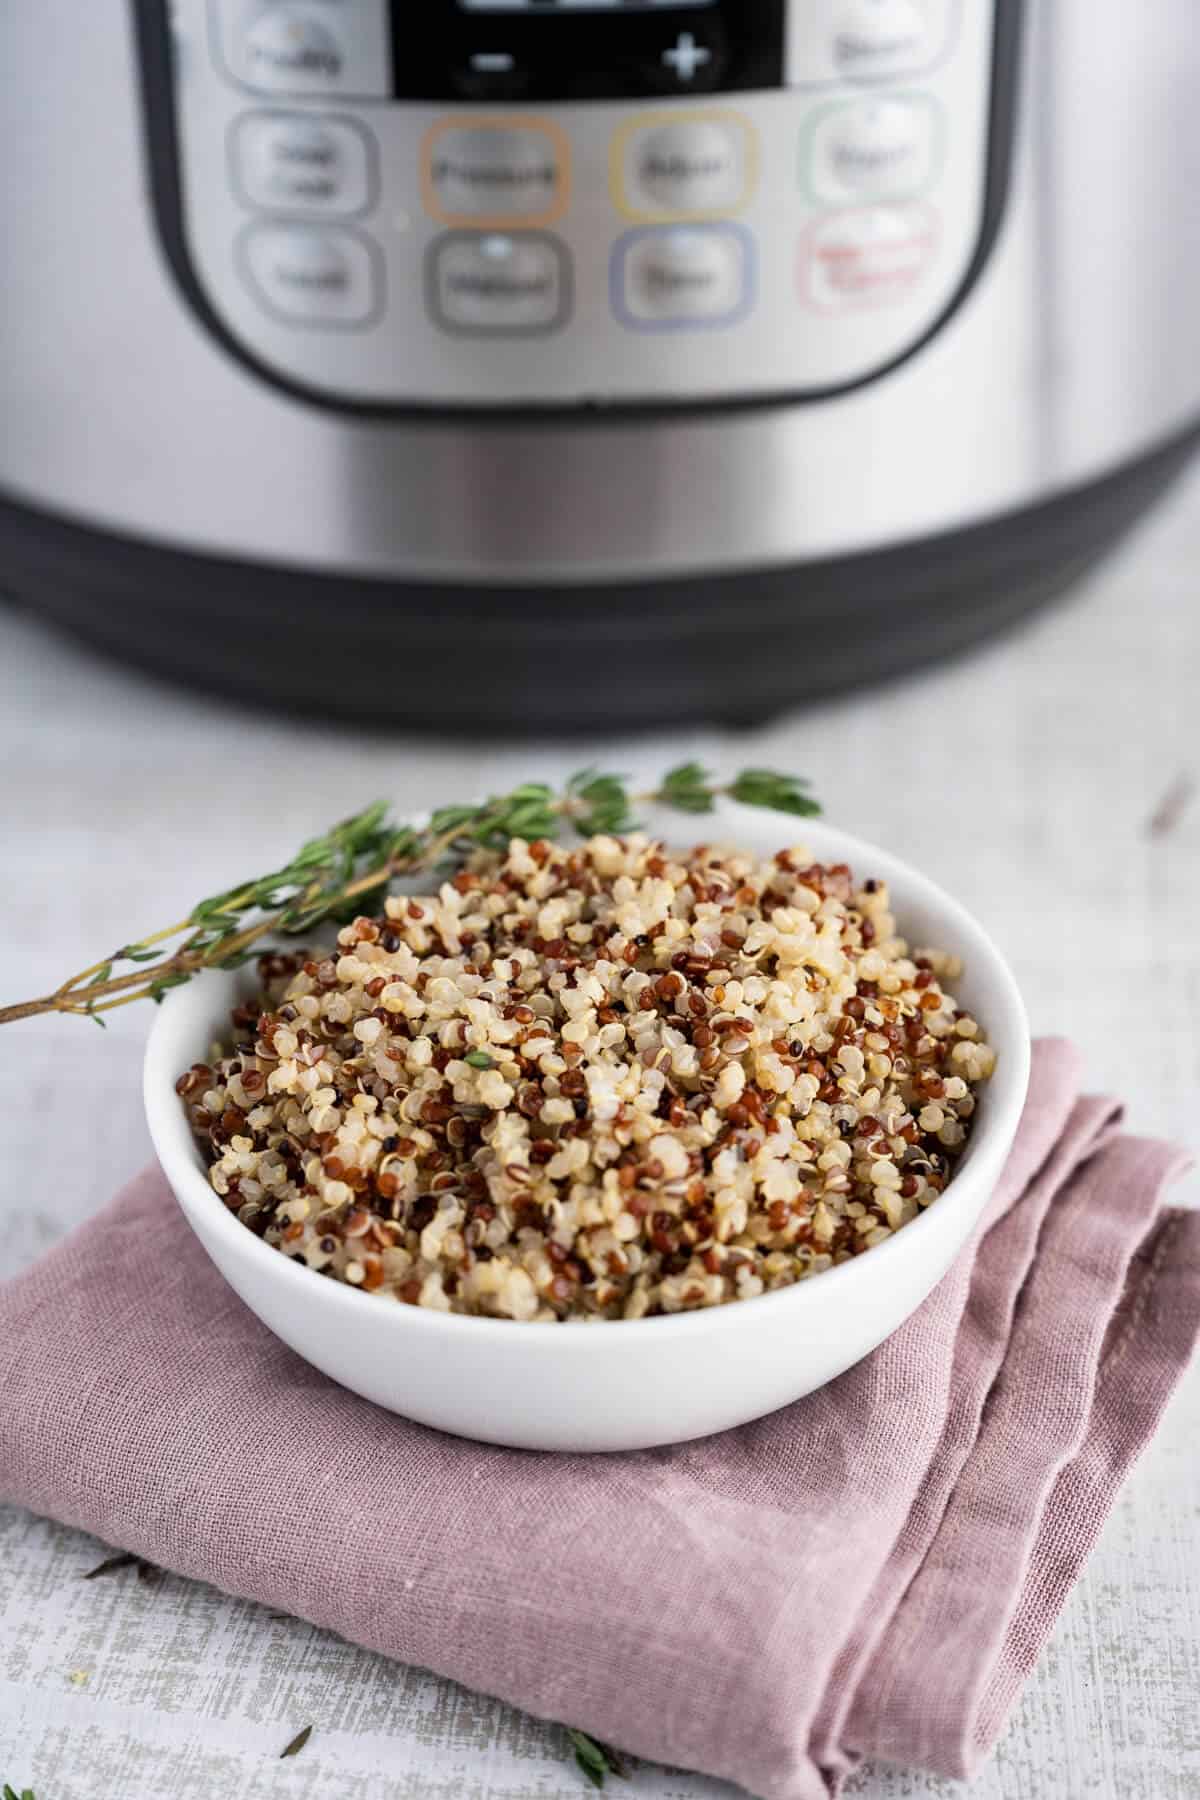 Instant Pot Cooking Times for Rice, Quinoa, and Other Grains